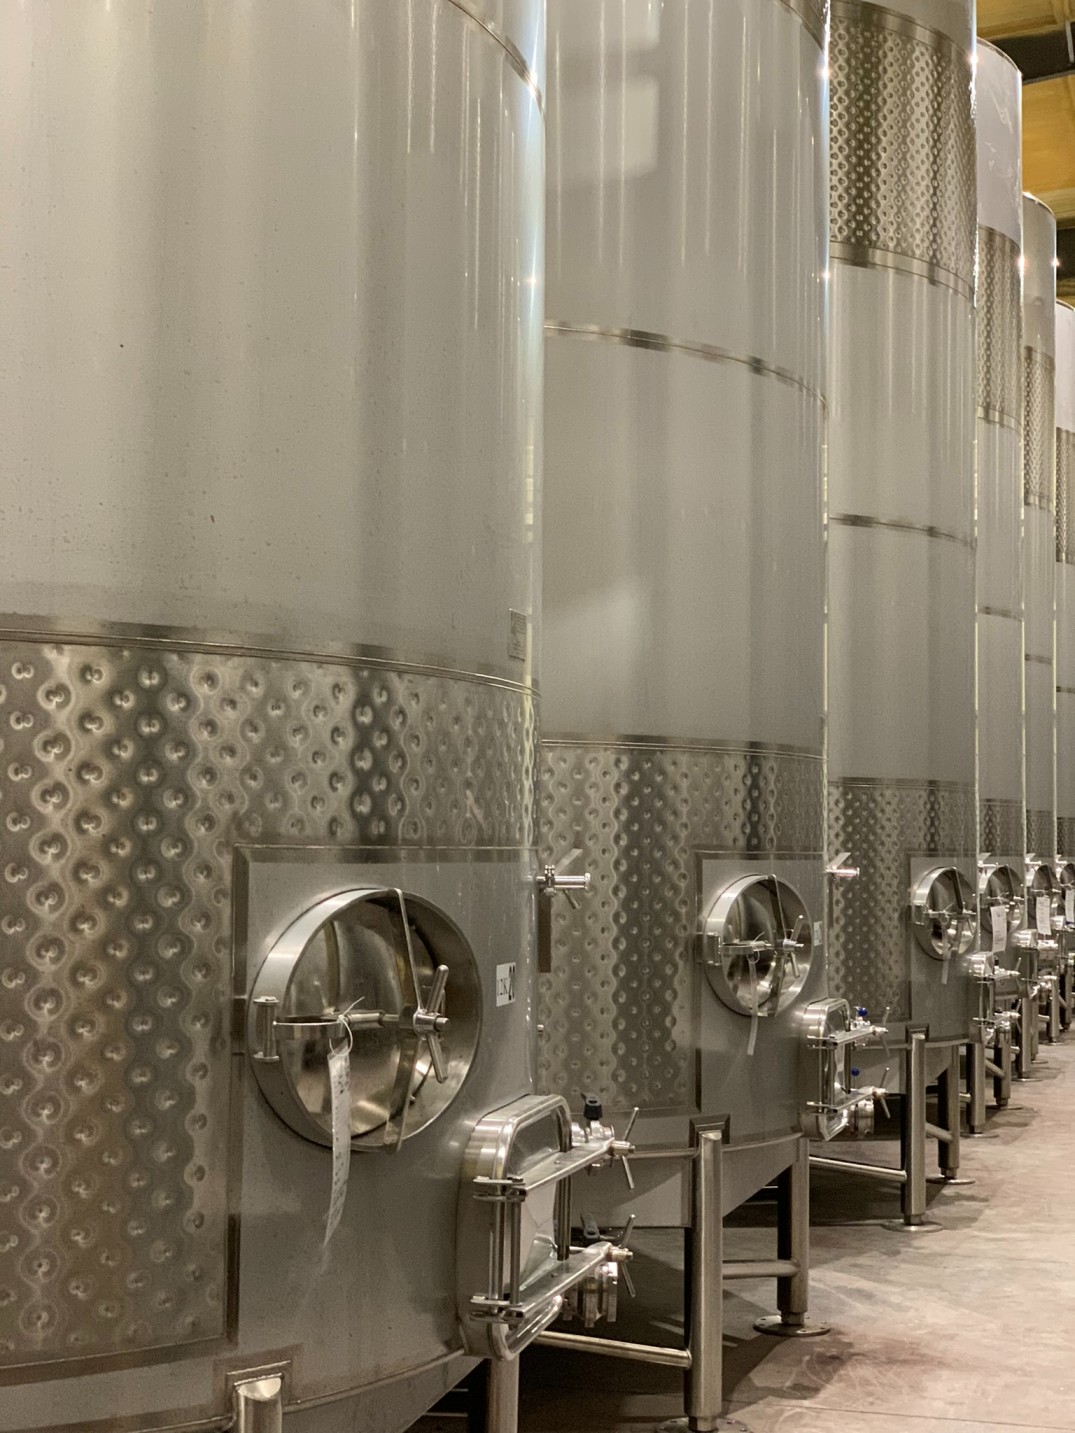 A row of large tall winery fermentation tanks looking at the front guages.